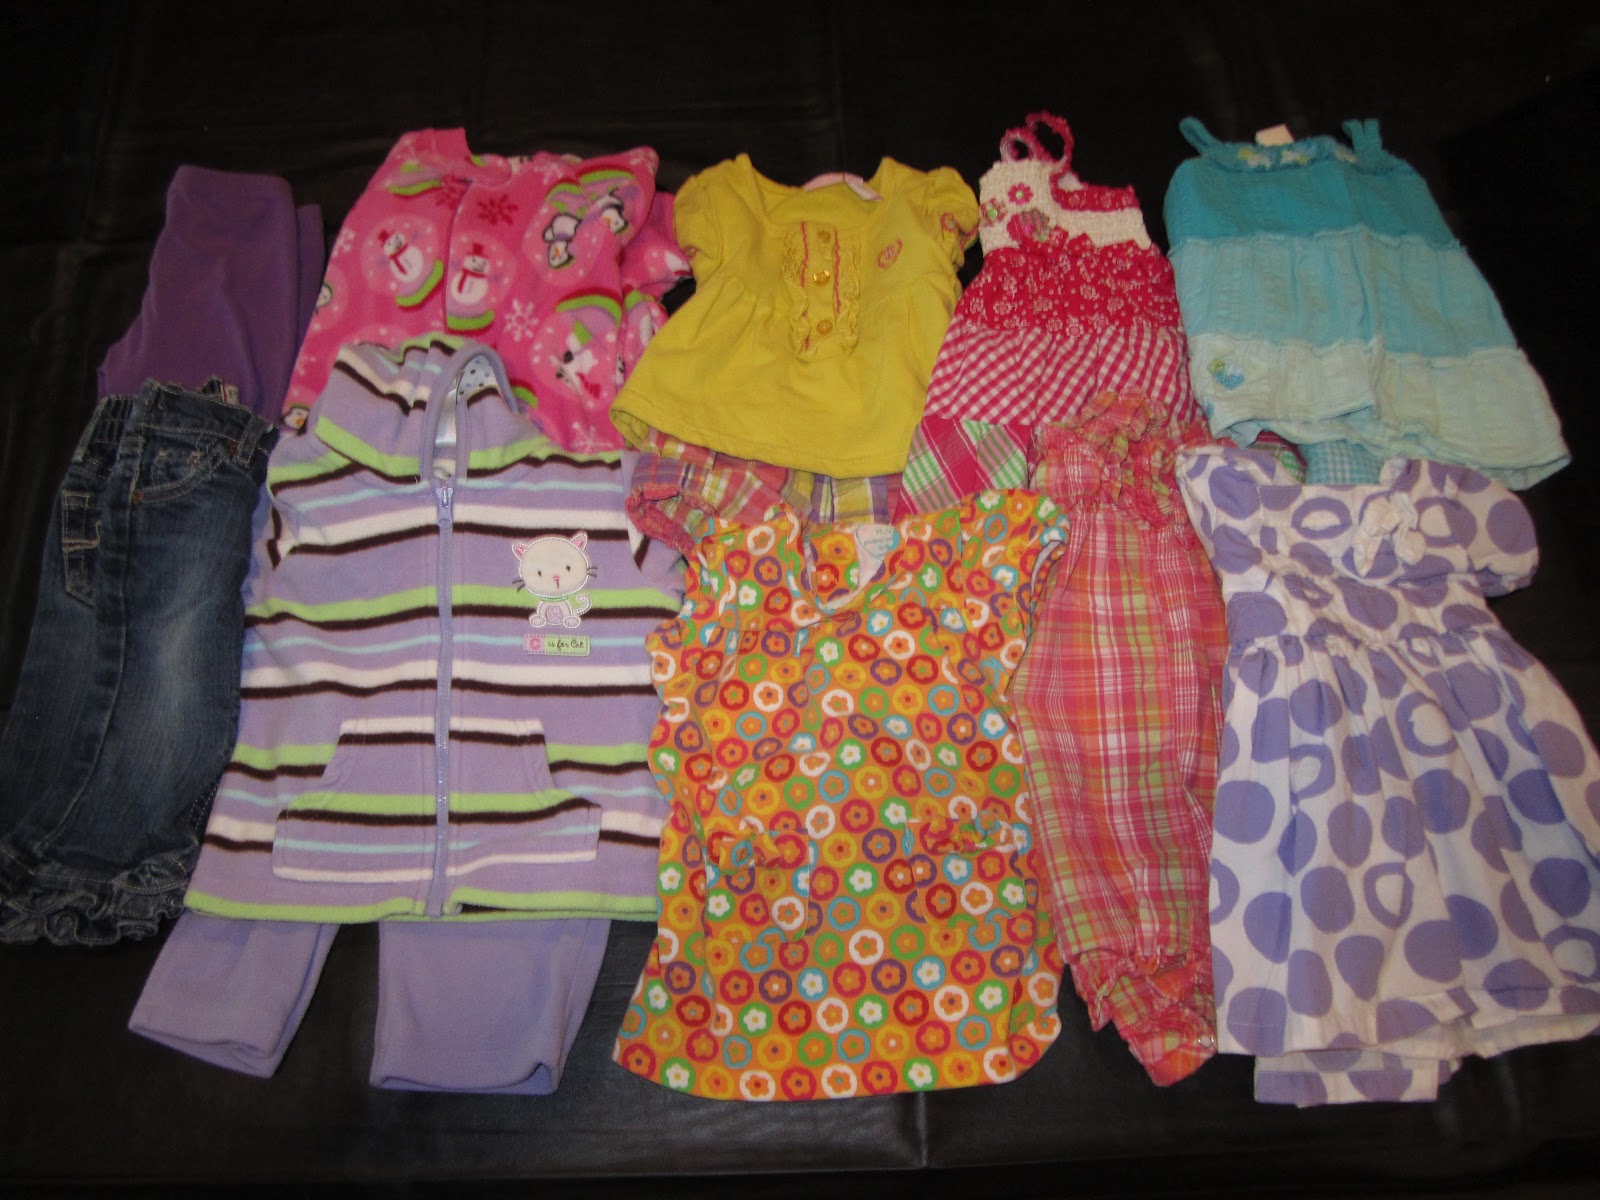 Bergh Party of 6: Lot of Girls Clothes For $ale - size 6-9m